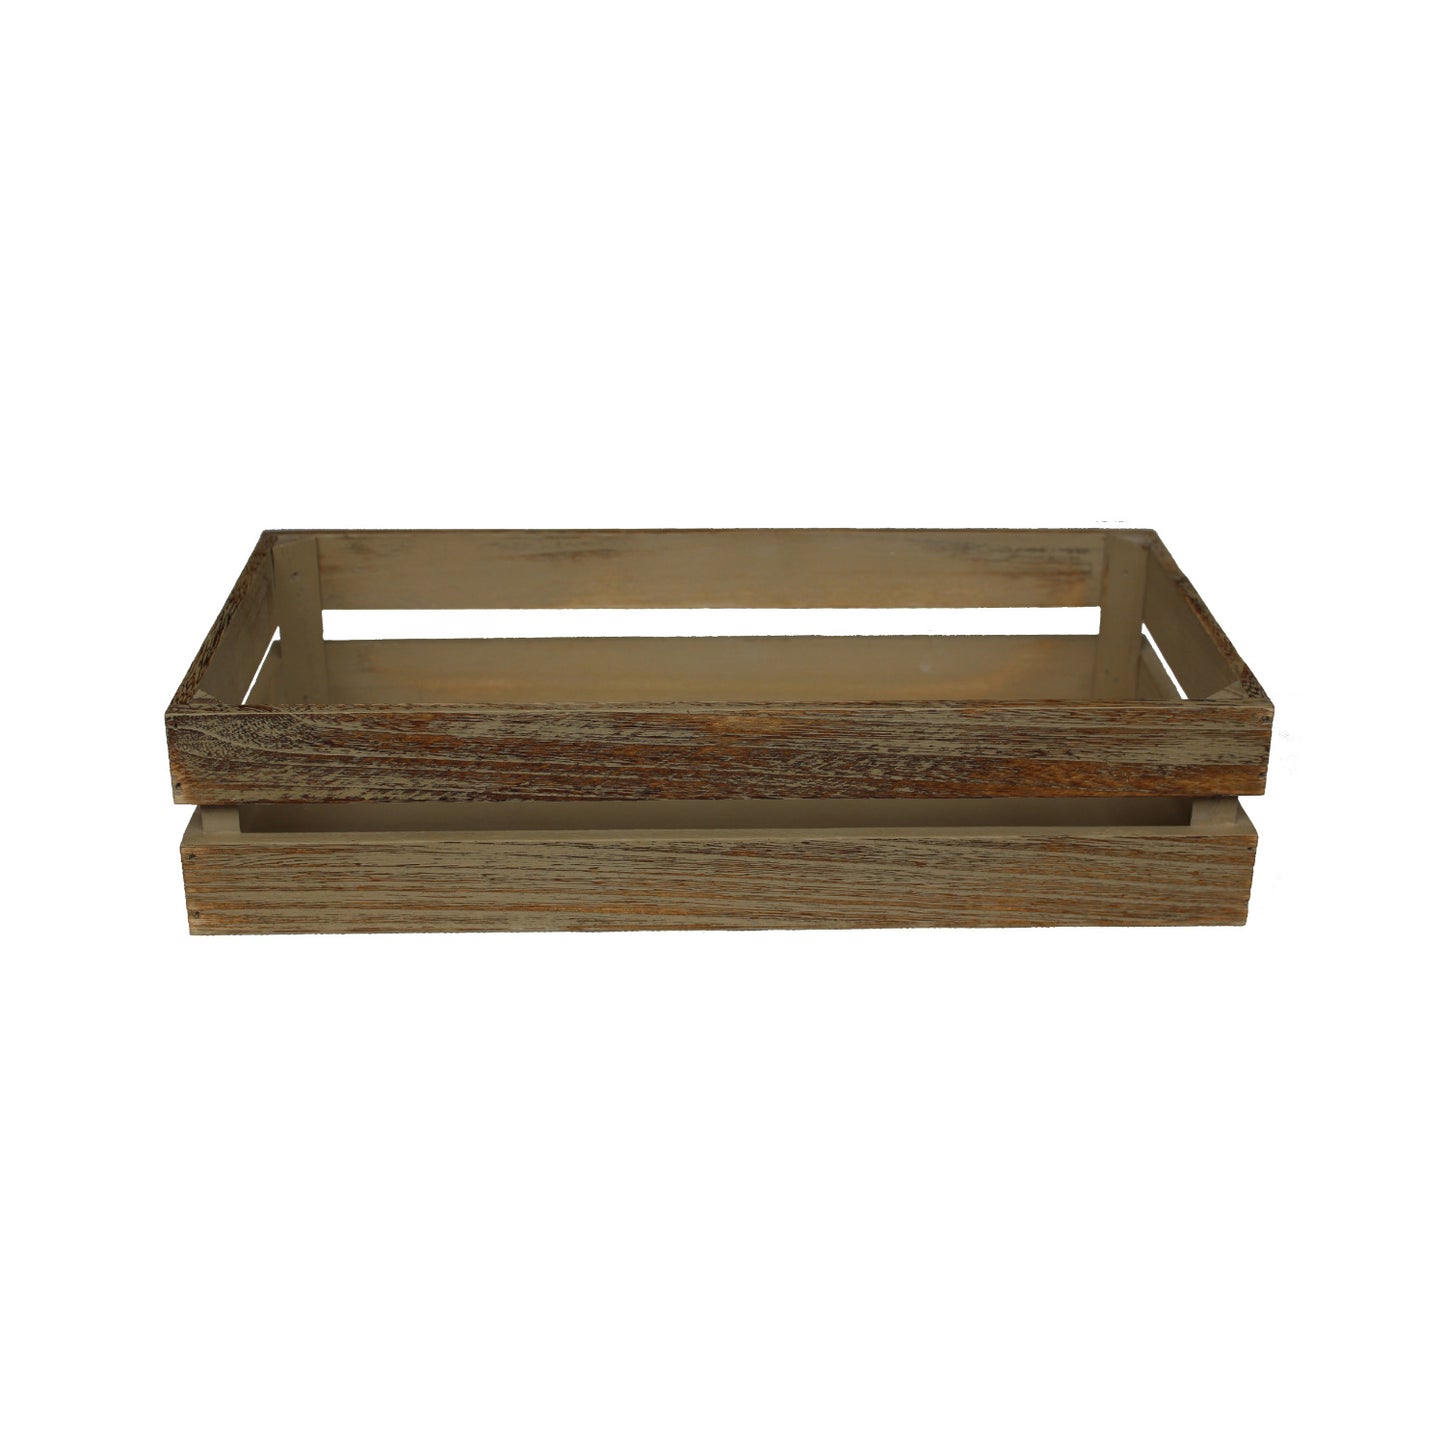 Small Oak Effect Packing Crate